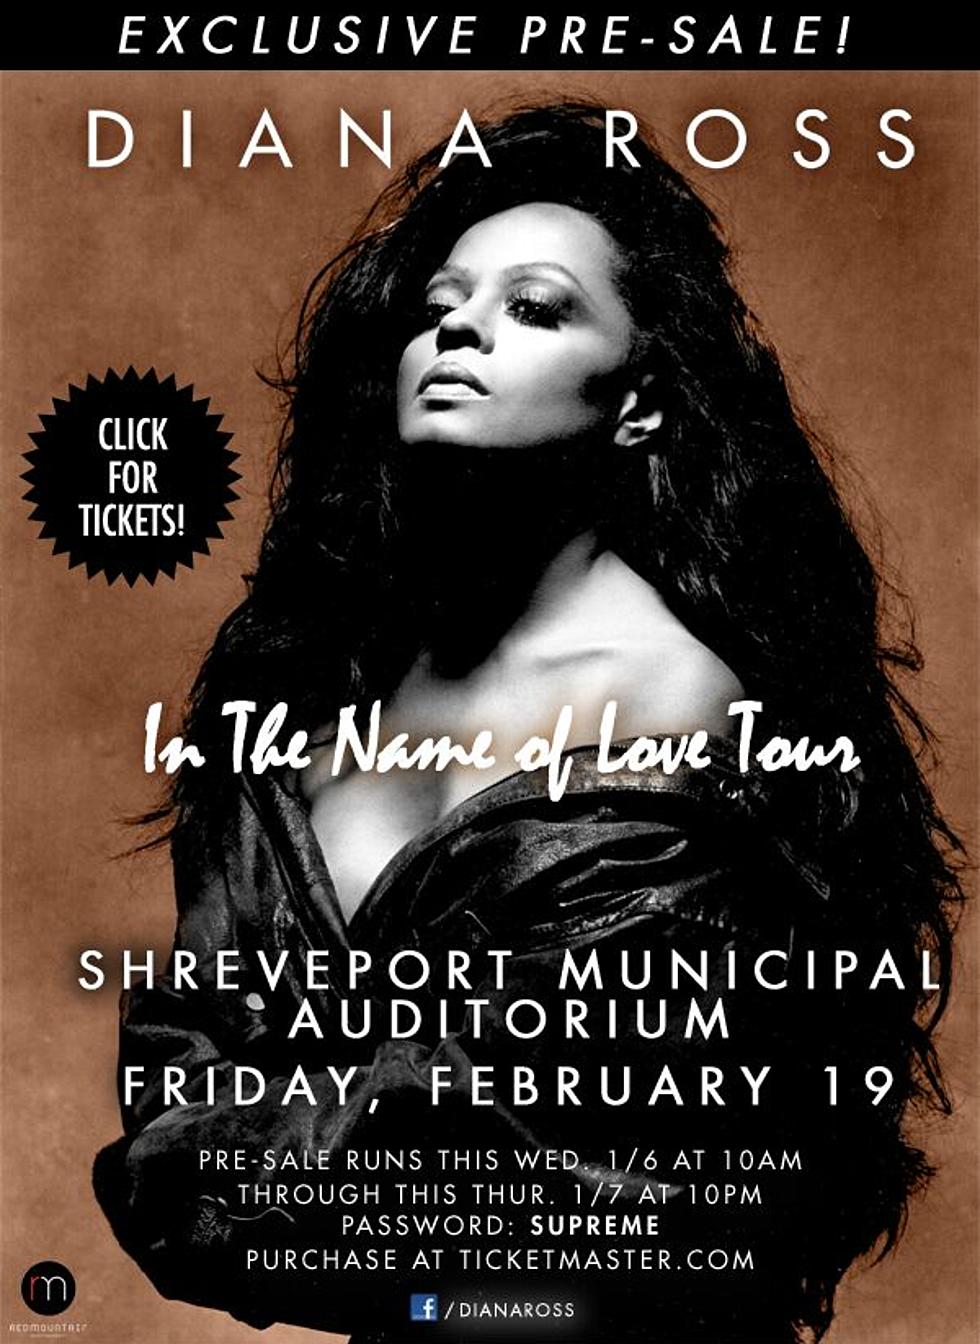 EXCLUSIVE – Diana Ross Presale Ticket Opportunity